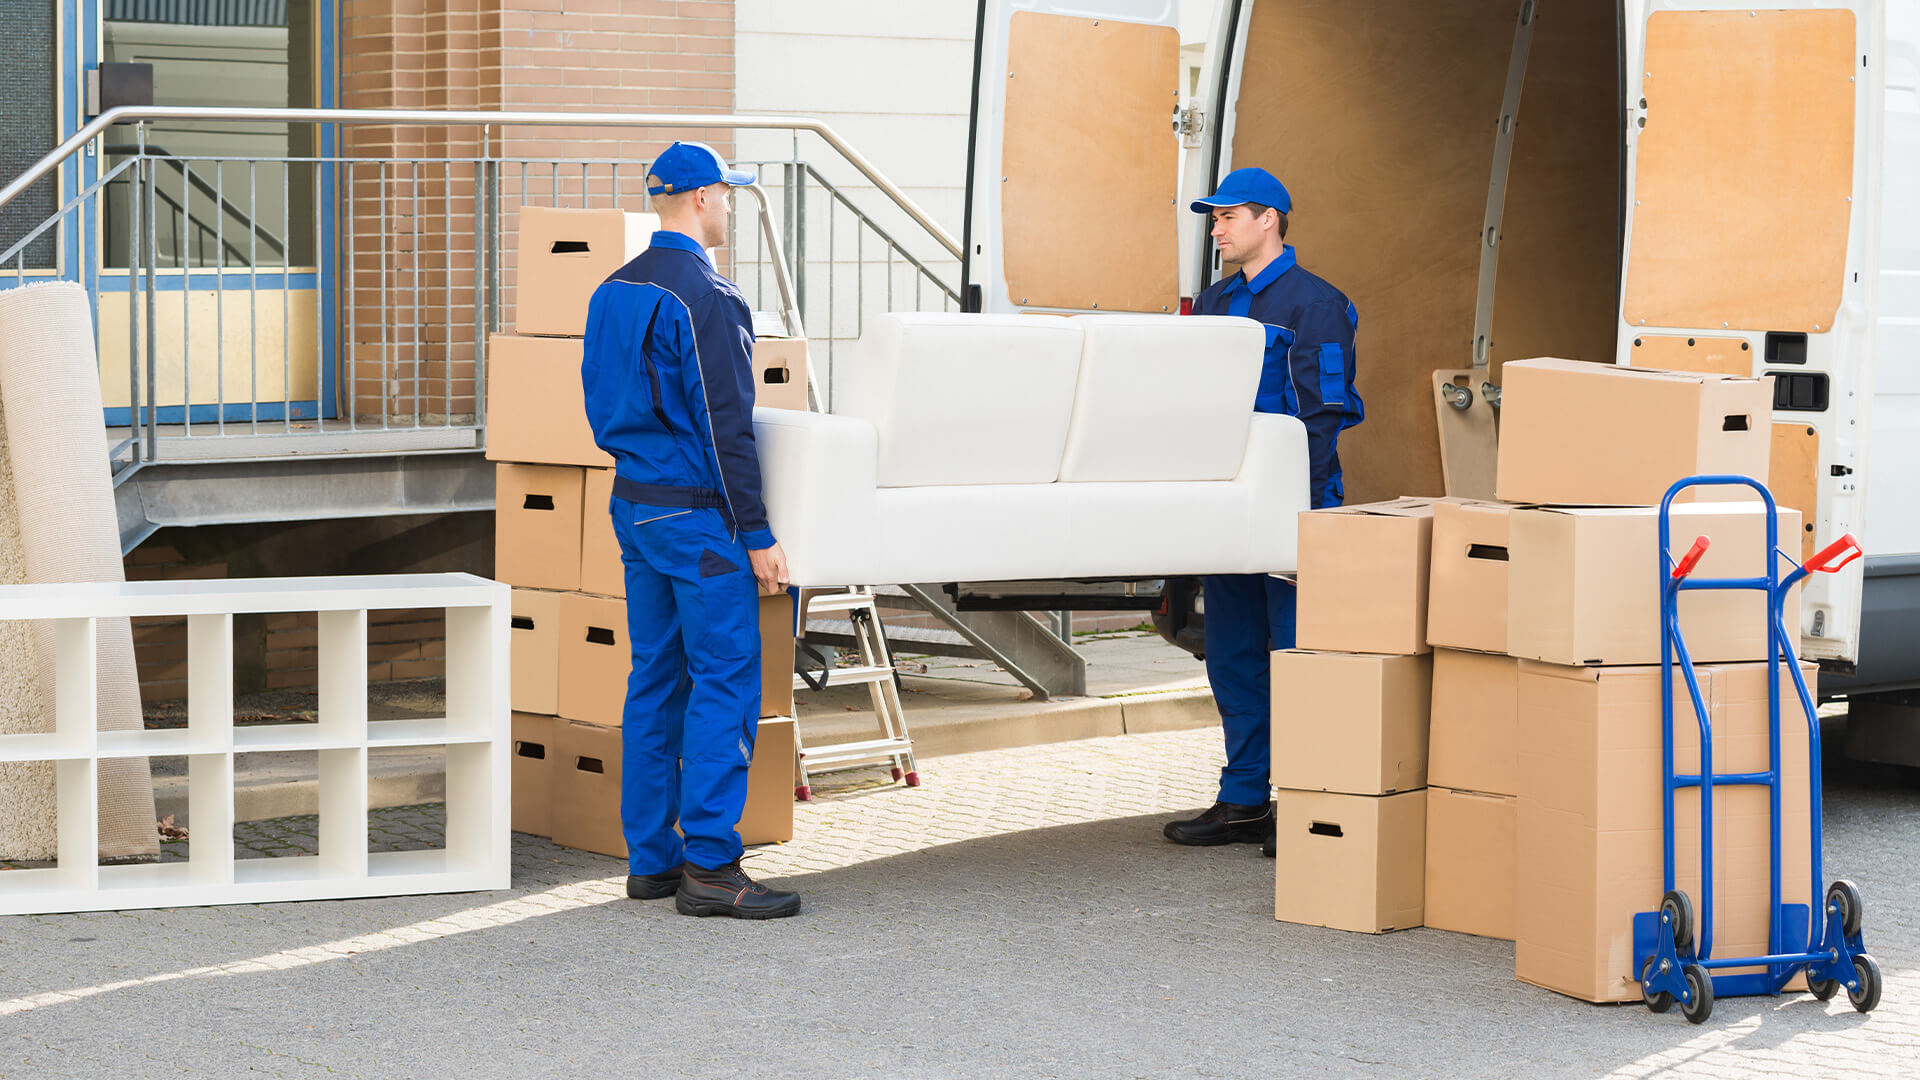 professional-movers-and-storage-in-dubai/